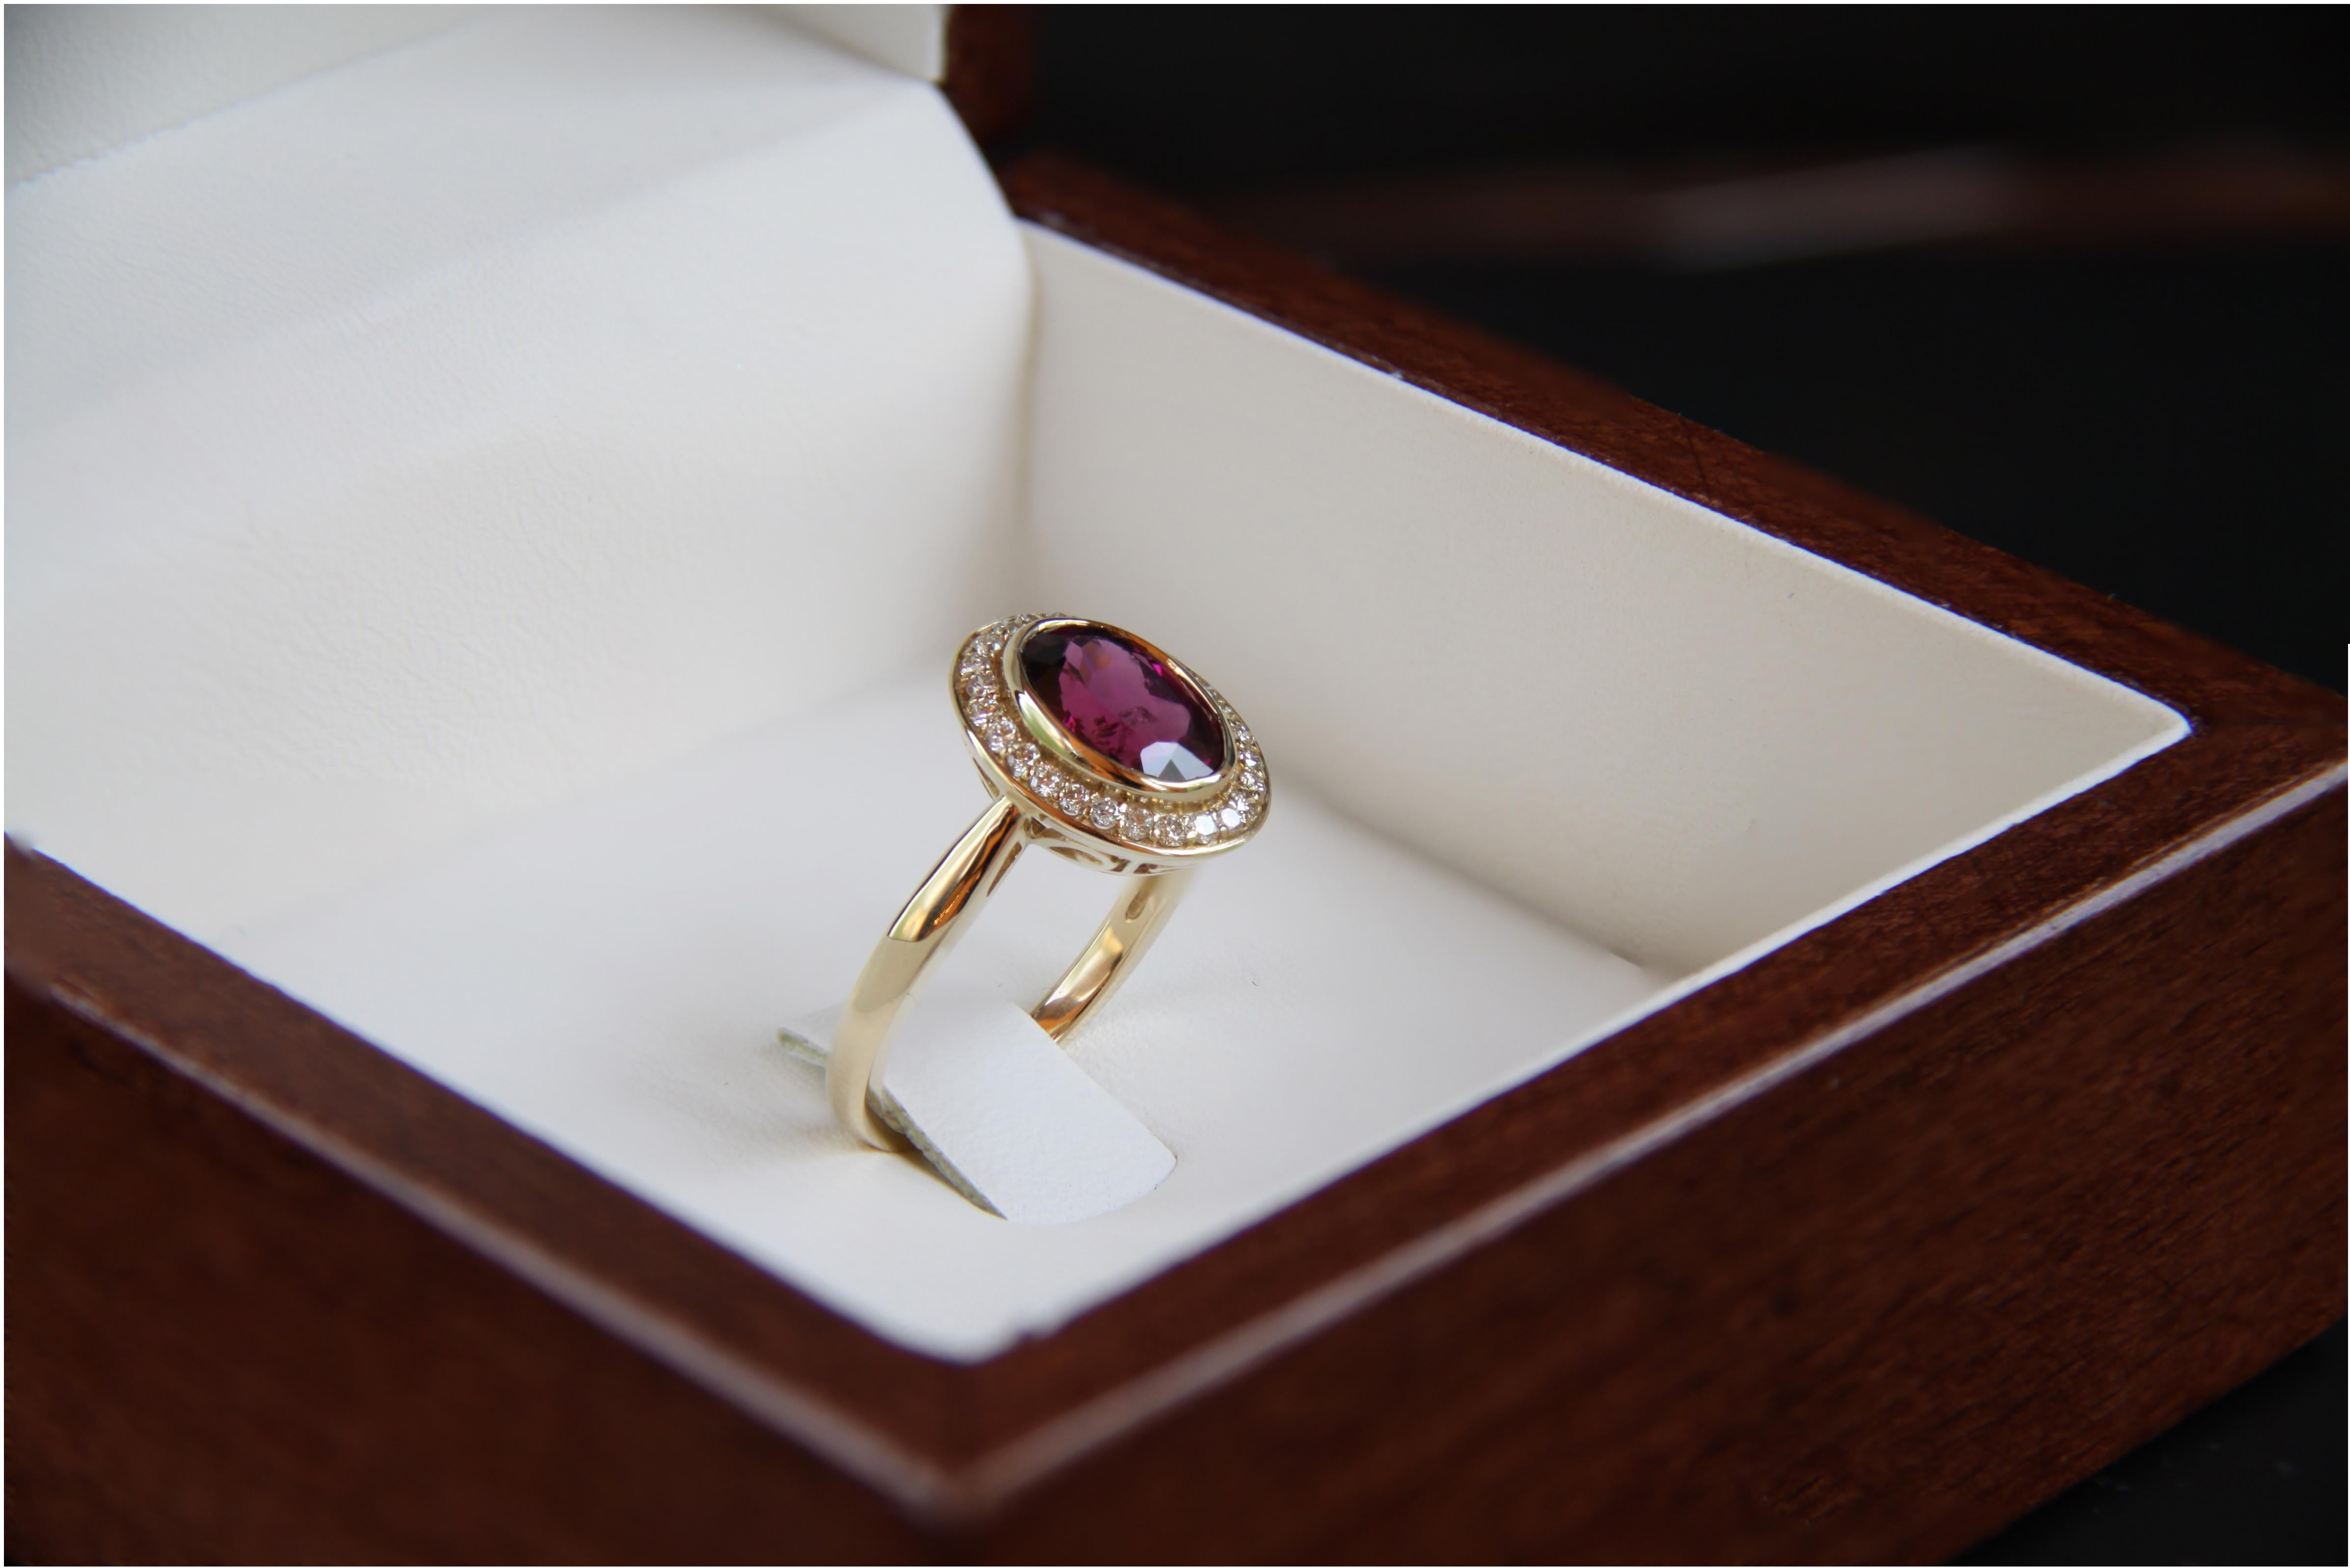 For Sale:  Garnet and diamonds 14k gold ring. 4